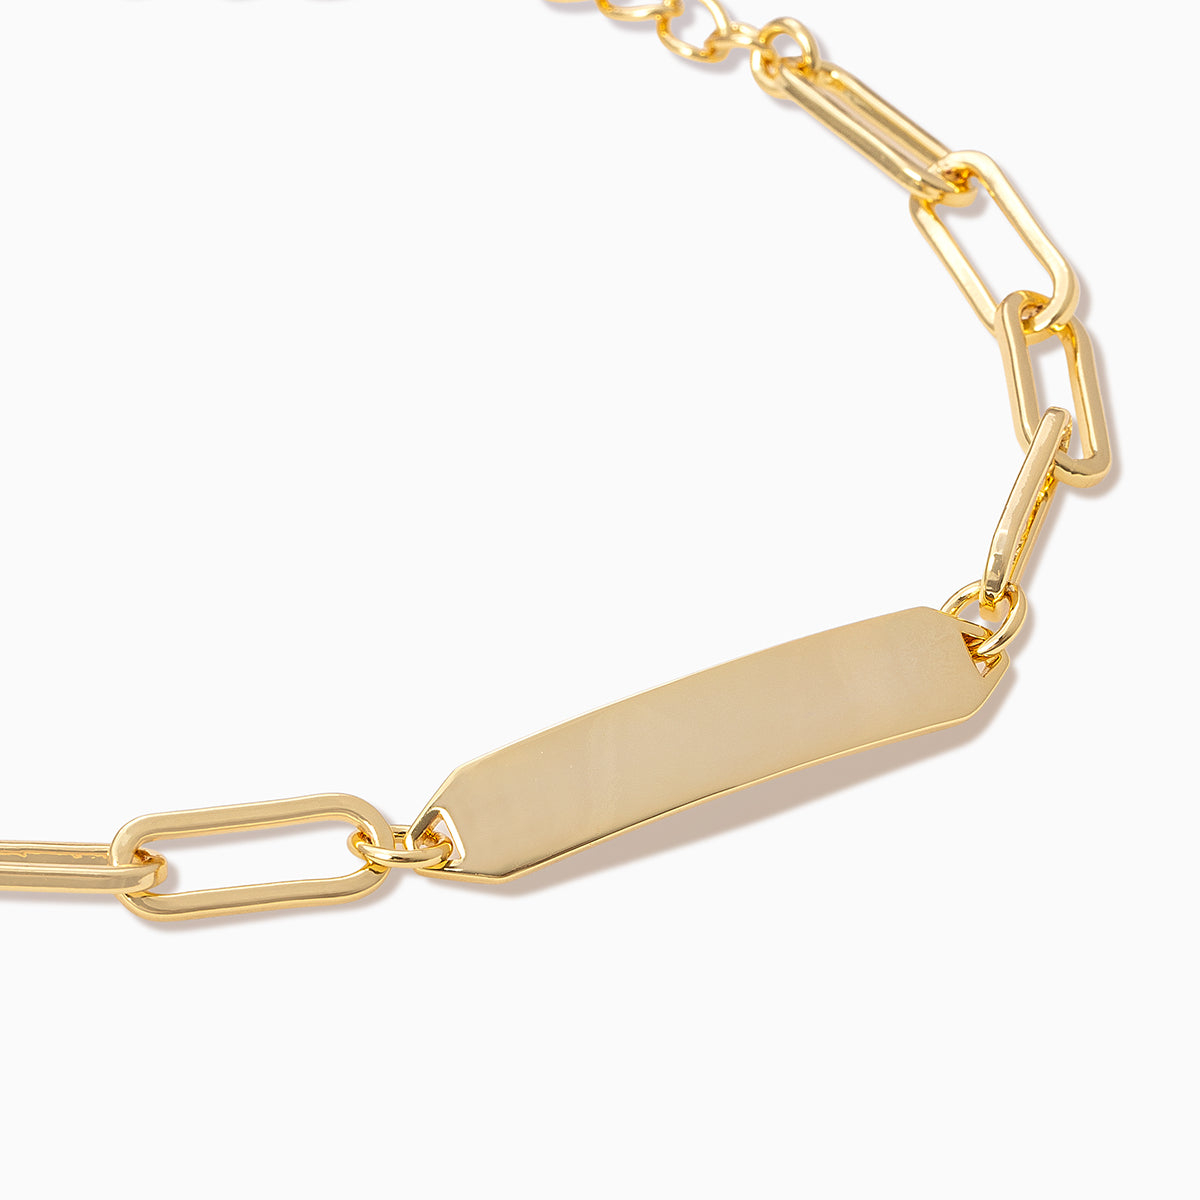 Chain and Bar Bracelet | Gold | Product Detail Image | Uncommon James